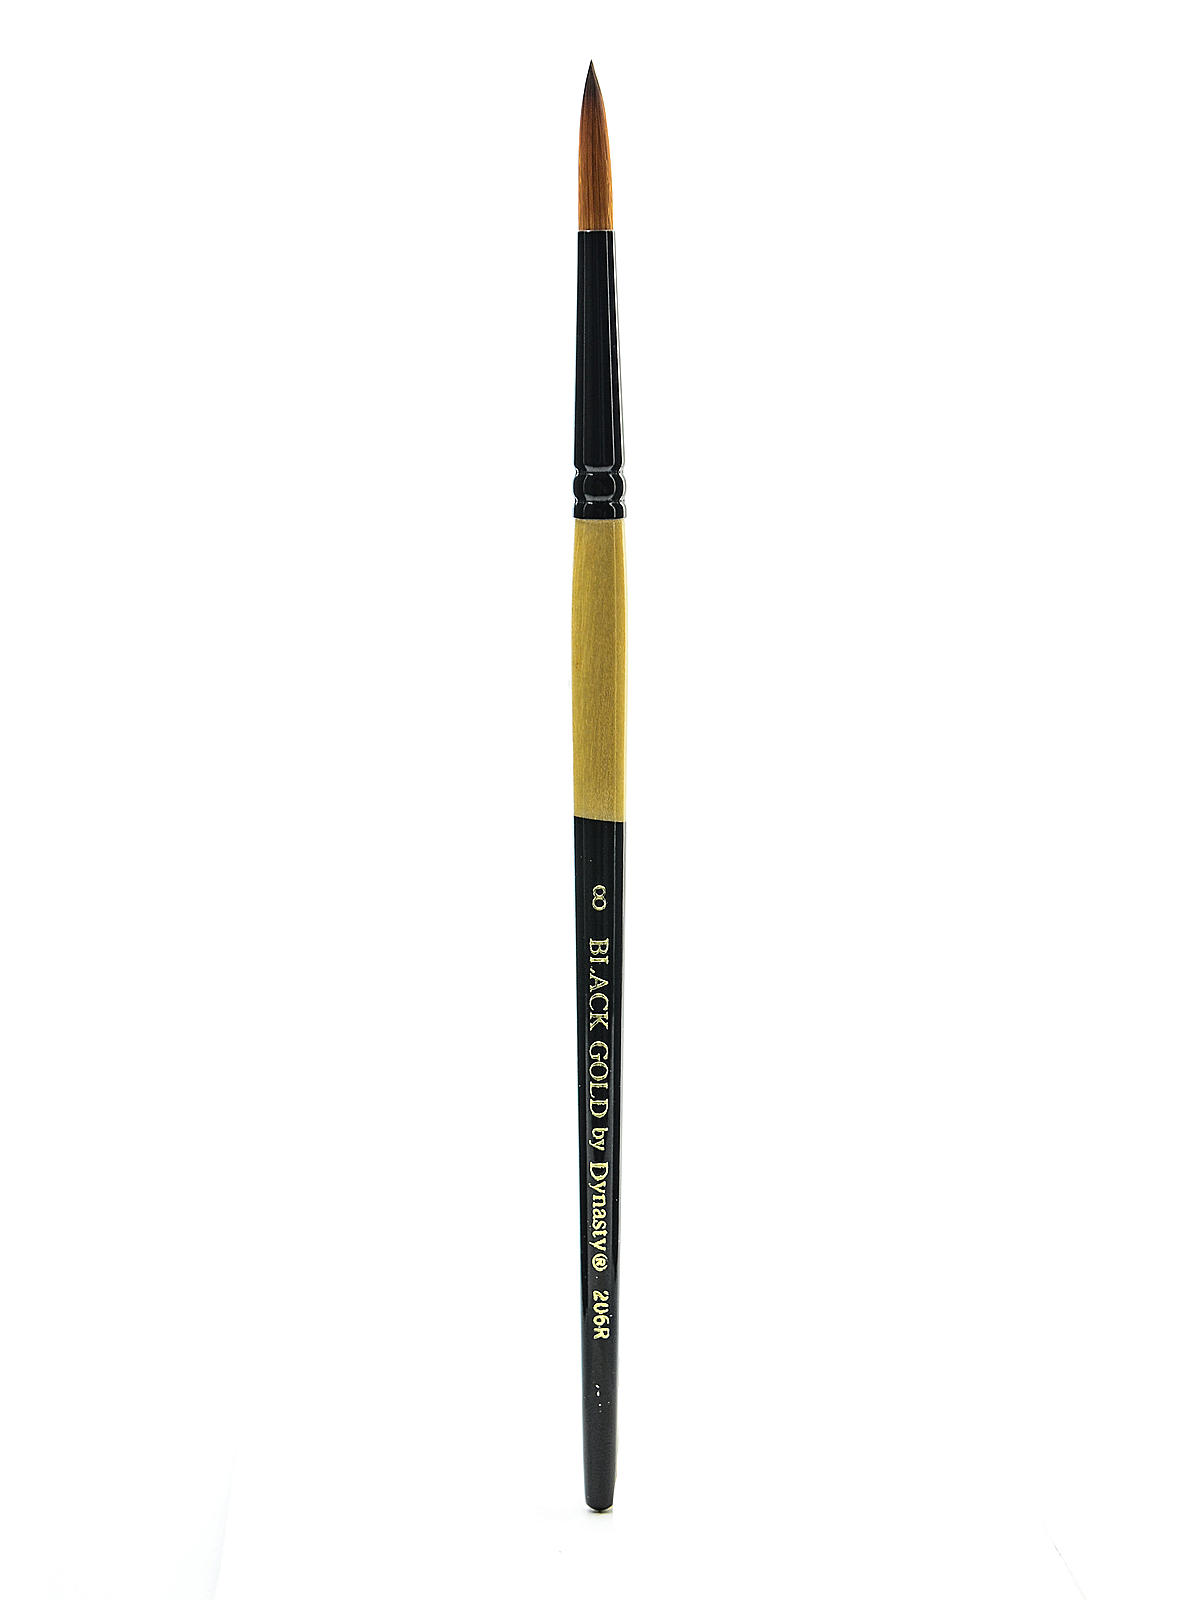 Black Gold Series Synthetic Brushes Short Handle 8 Round